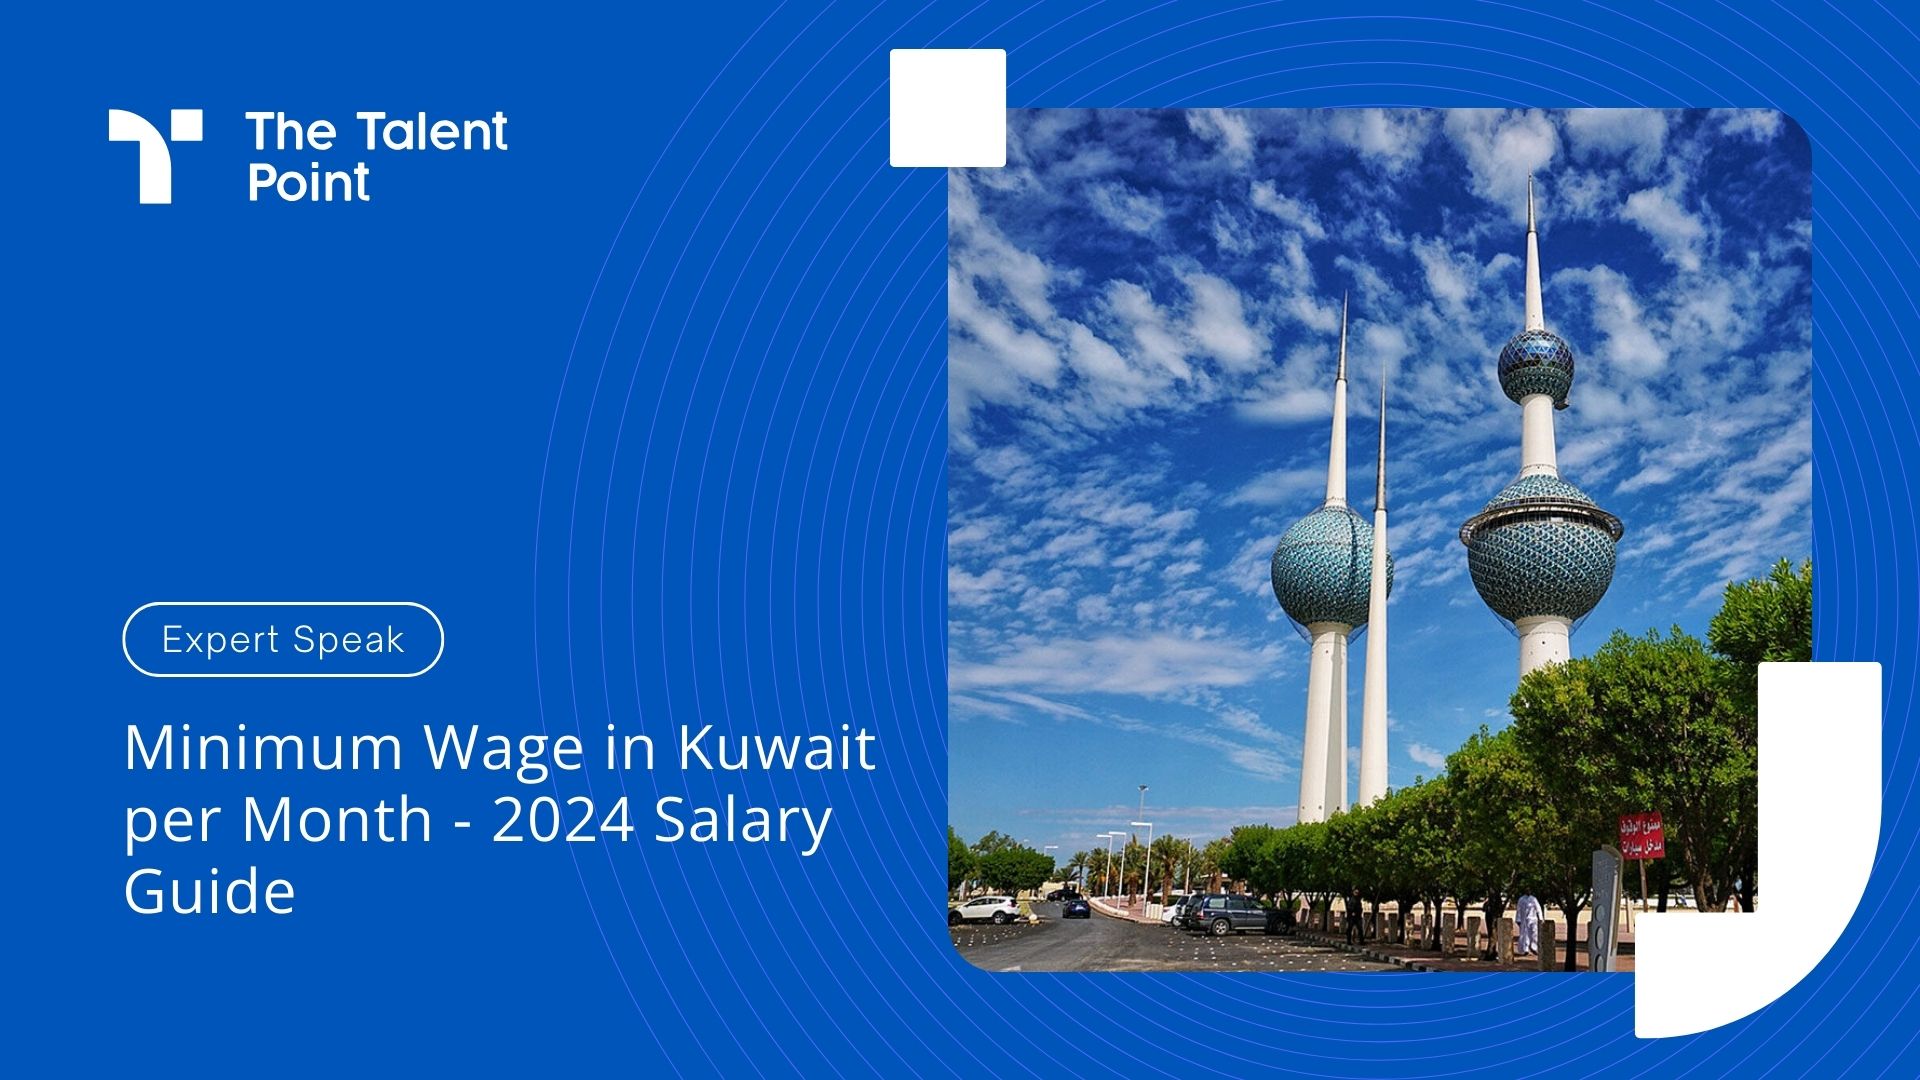 Minimum Wage in Kuwait per Month 2024 Salary Guide